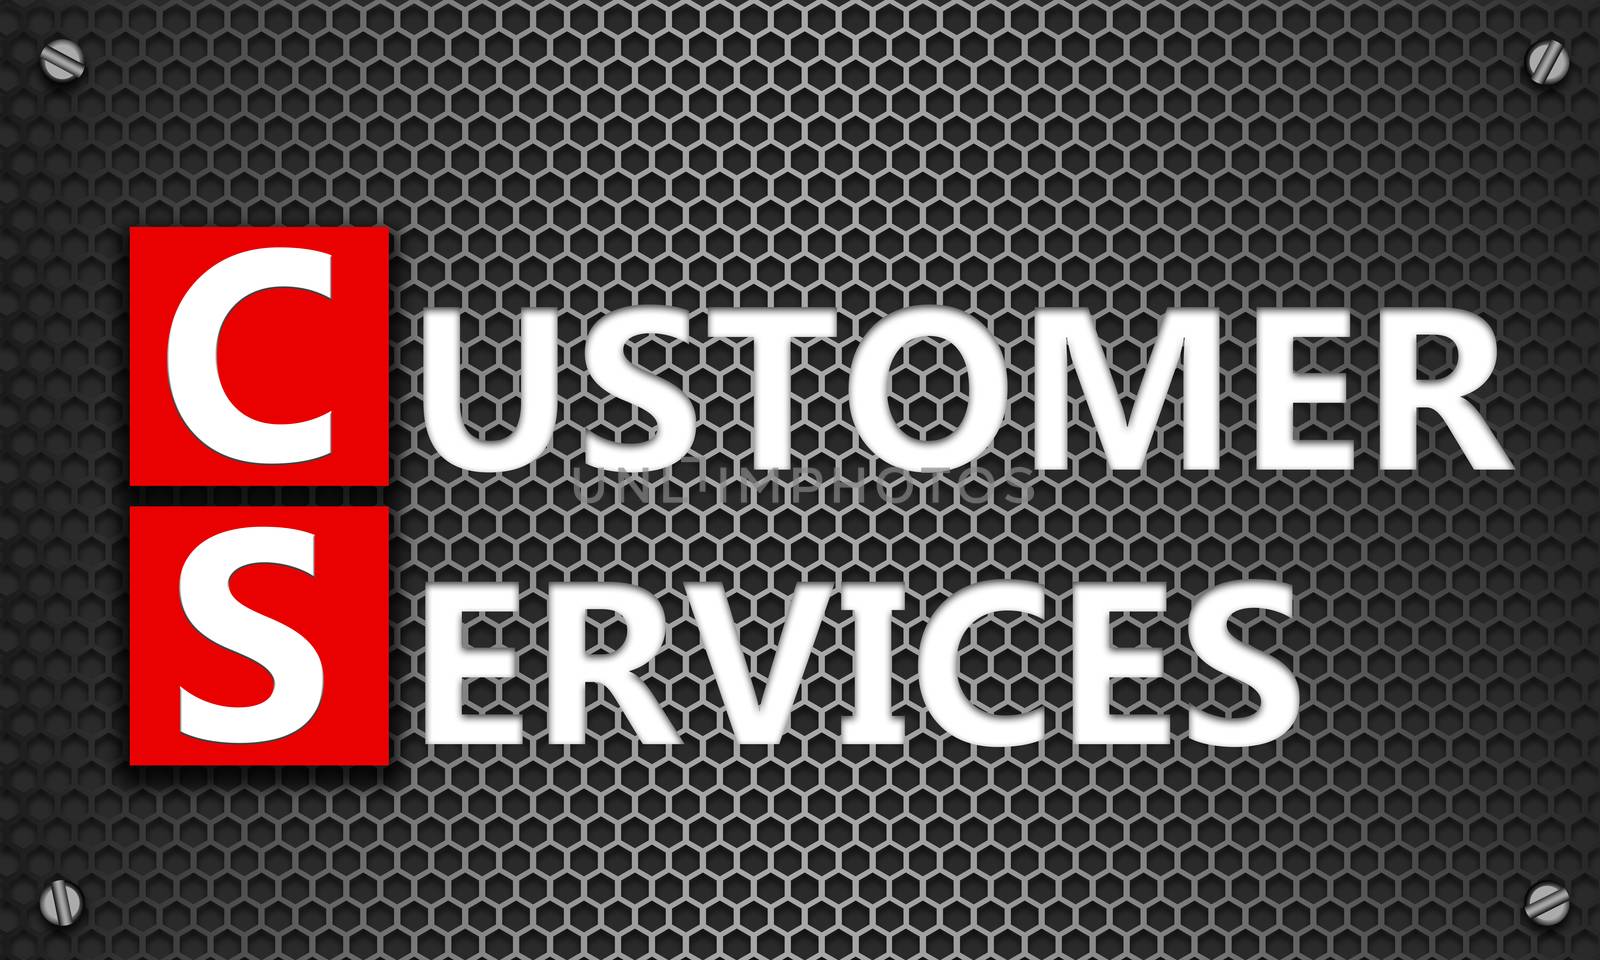 Customer service concept on mesh hexagon background by tang90246